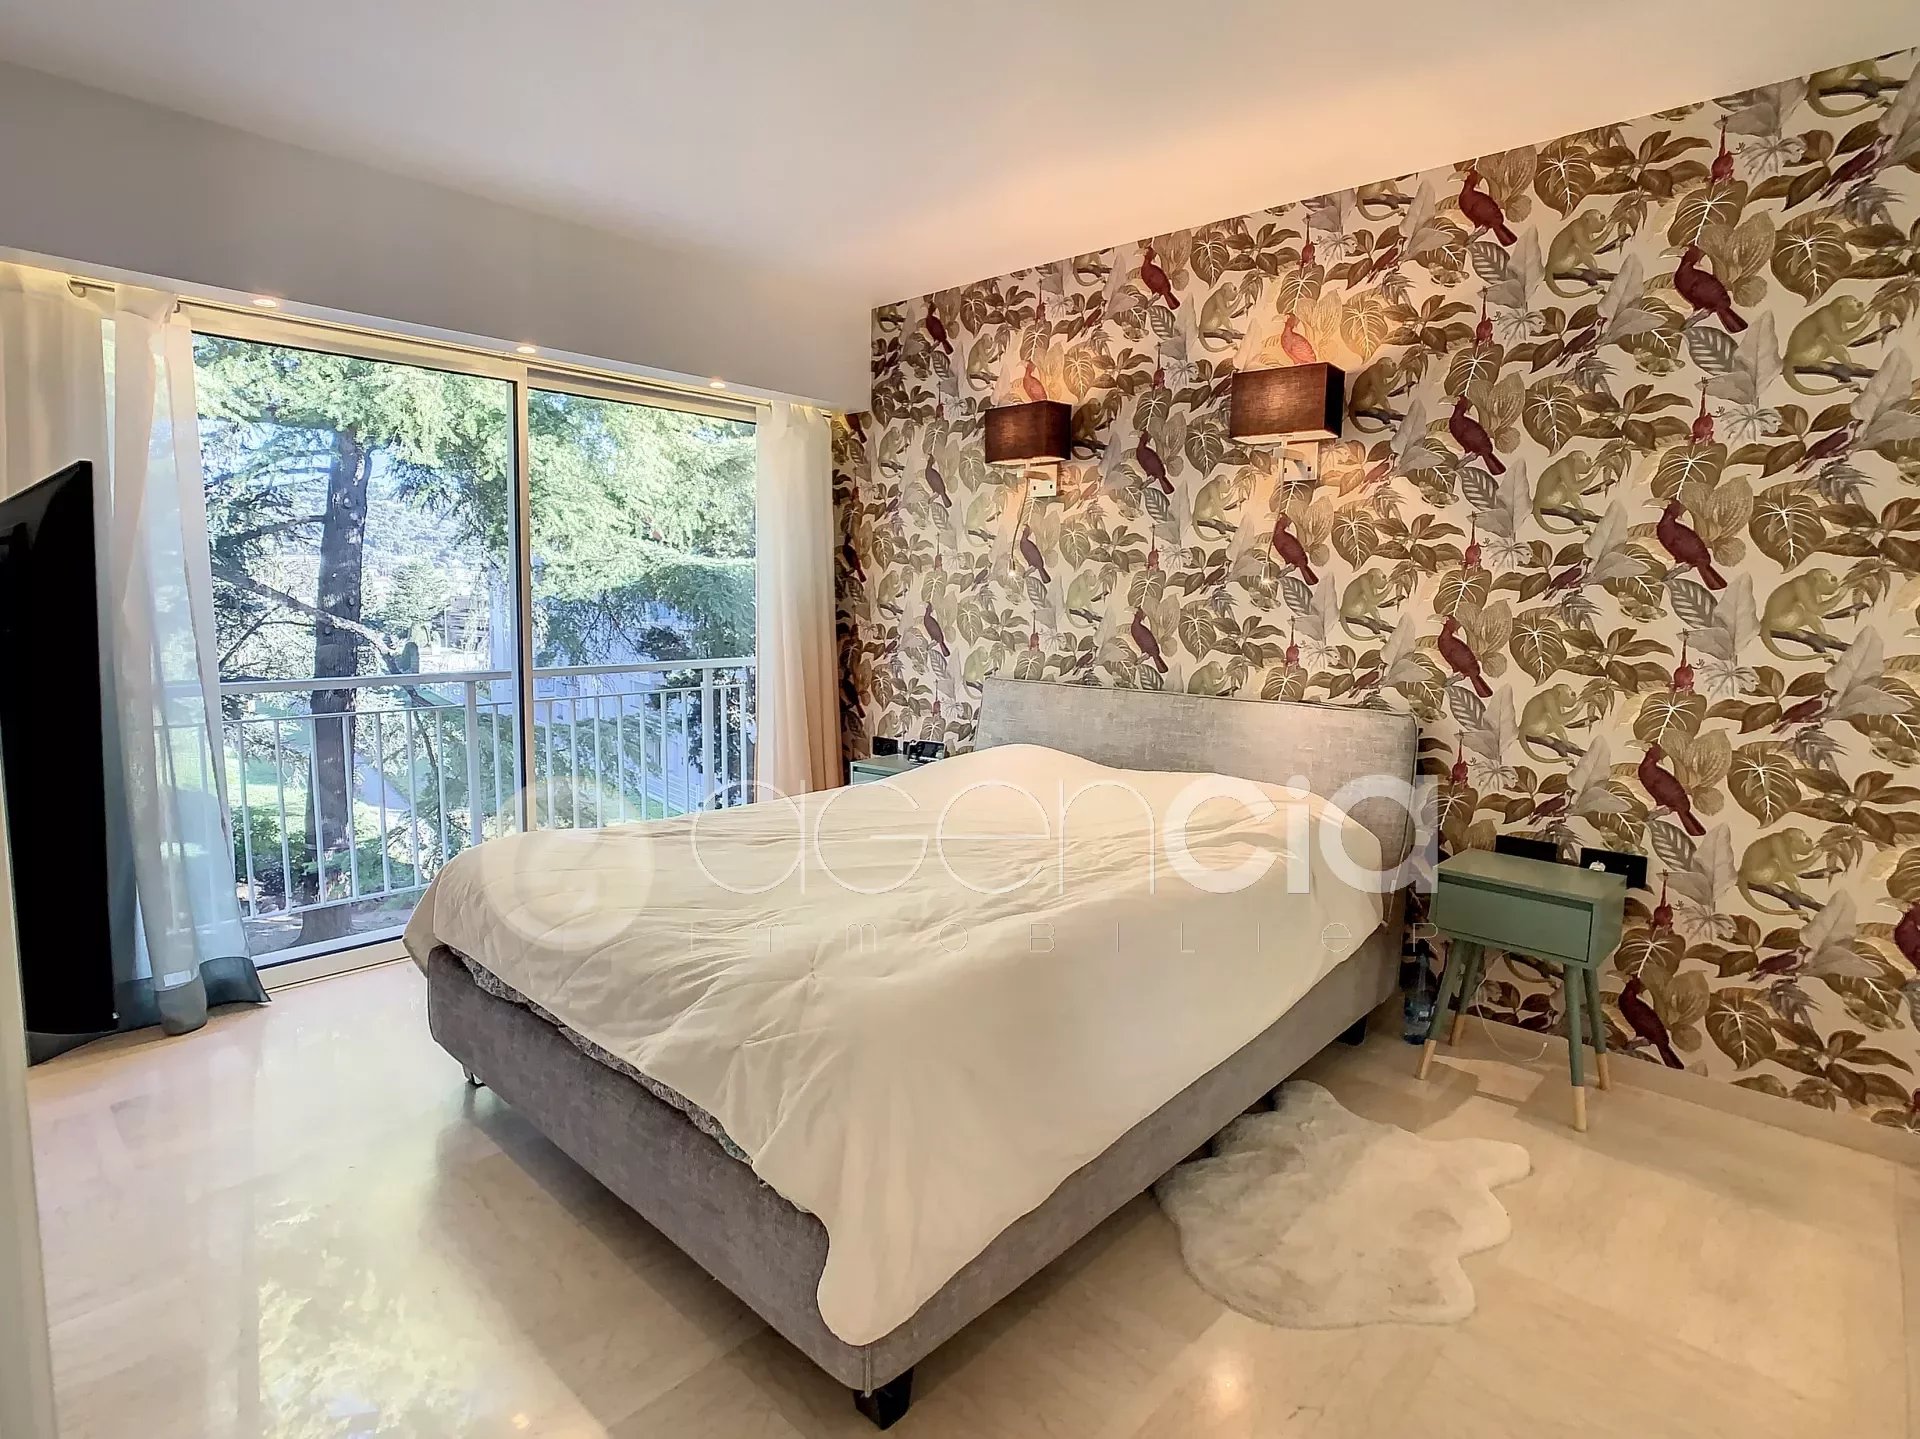 4-ROOM APARTMENT 110 M2 IN ABSOLUTE CALM - LUXURY RESIDENCE